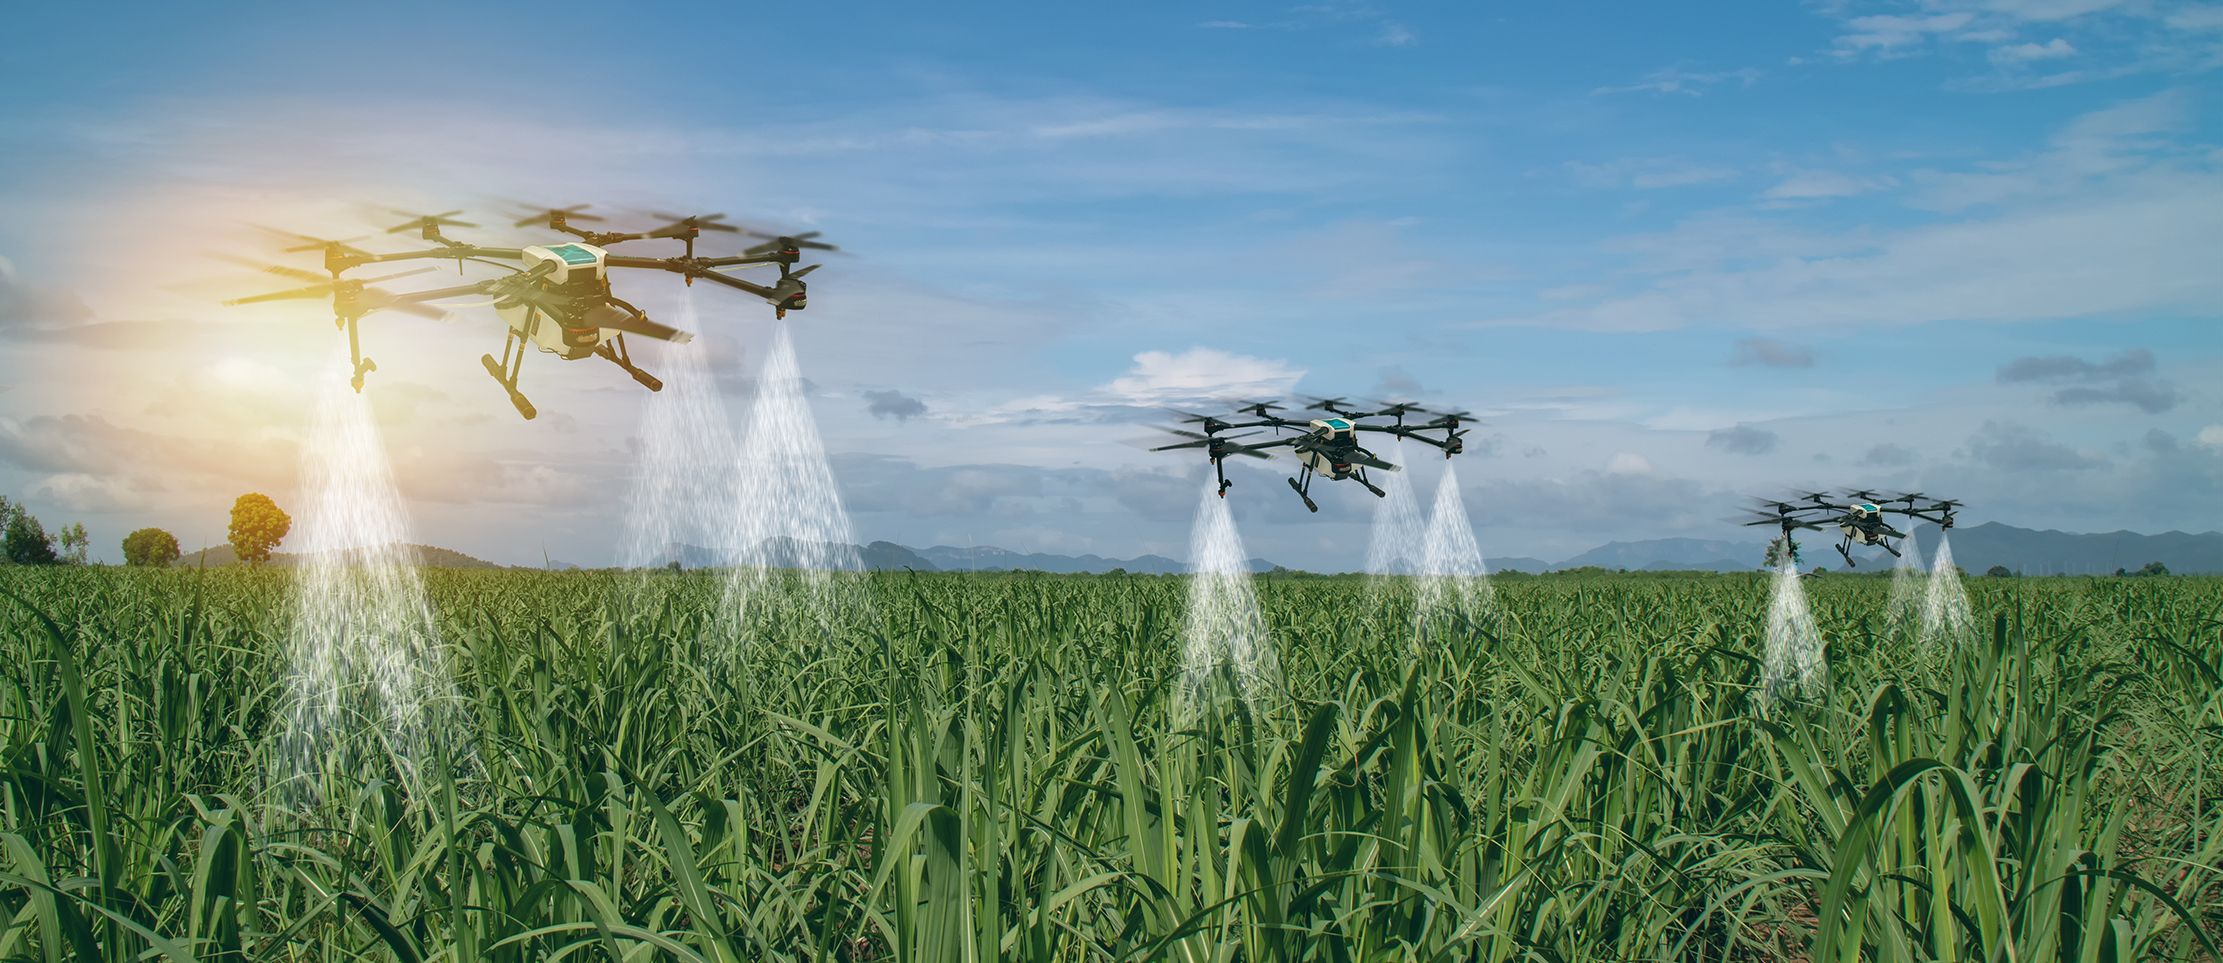 How edge computing can analyse real-time data from drones in agricultural applications